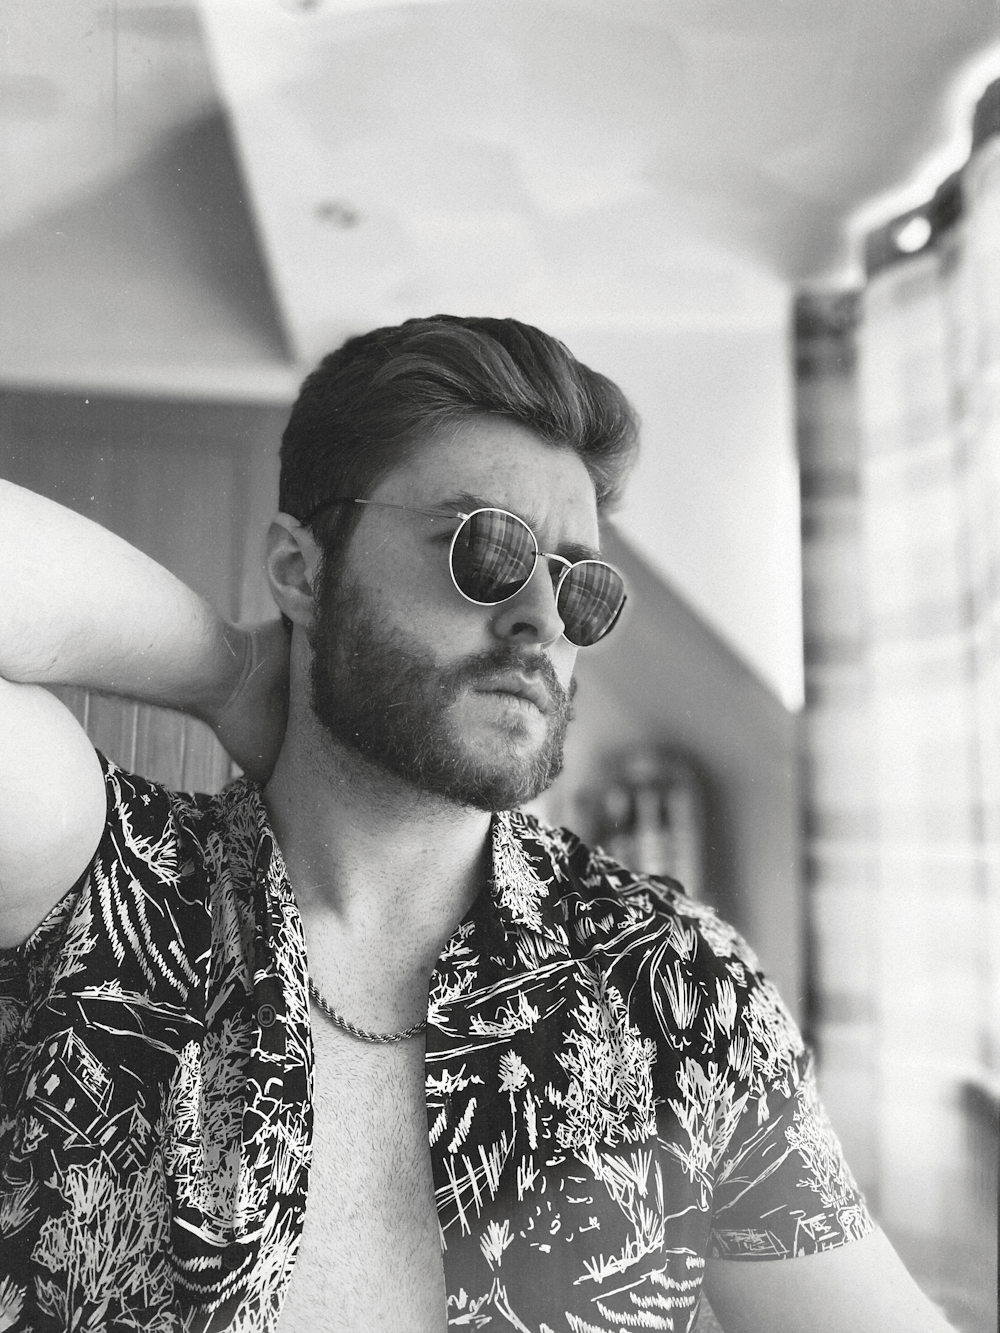 grayscale photo of man wearing sunglasses and floral shirt